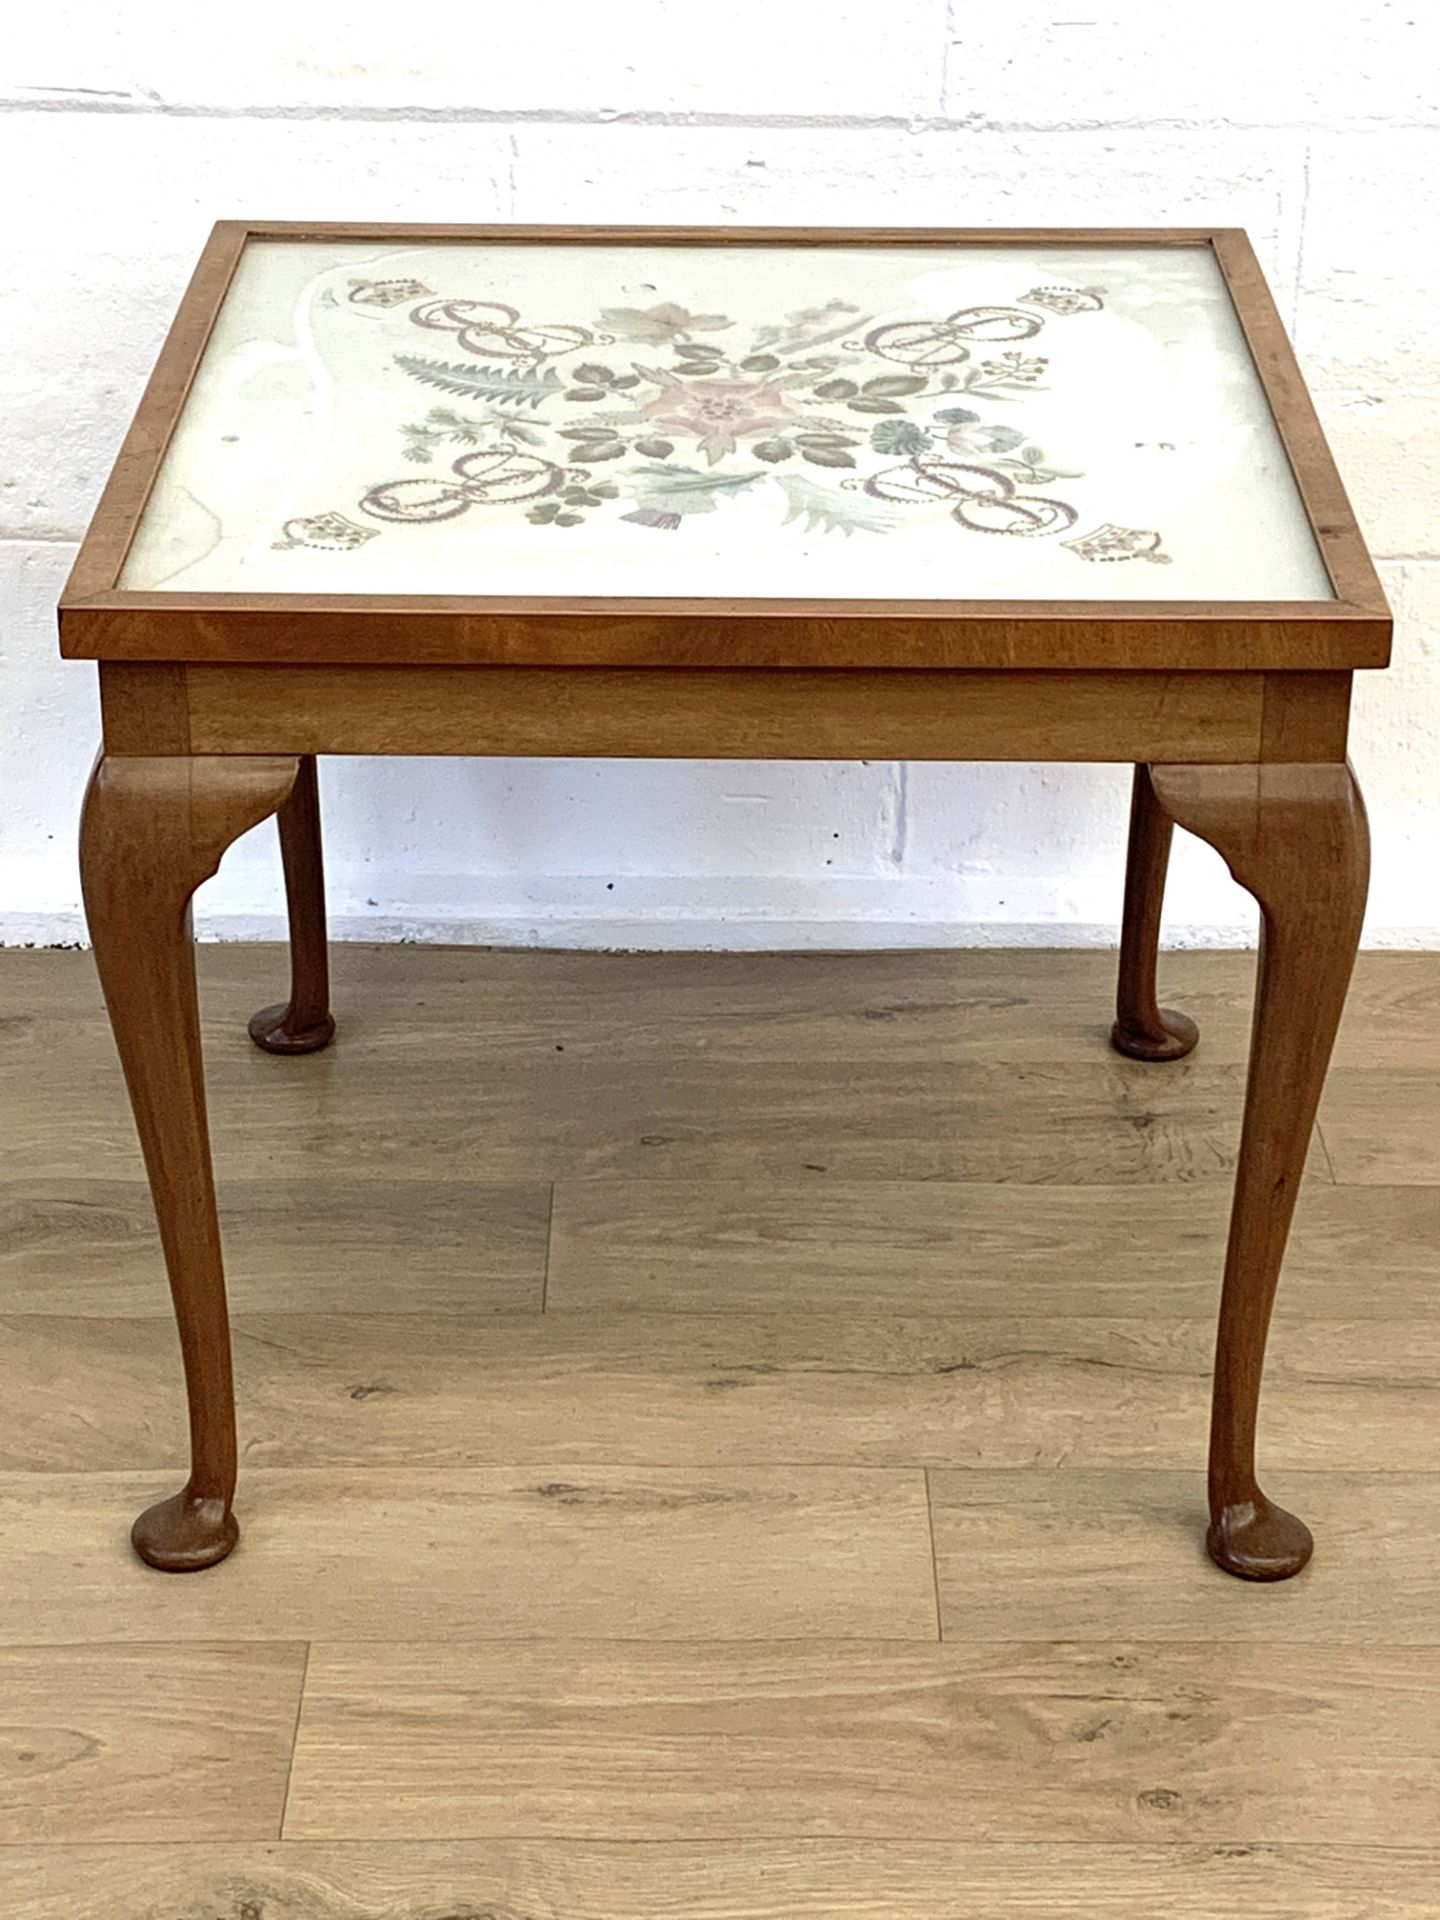 Mahogany framed side table with glazed embroidered panel to top